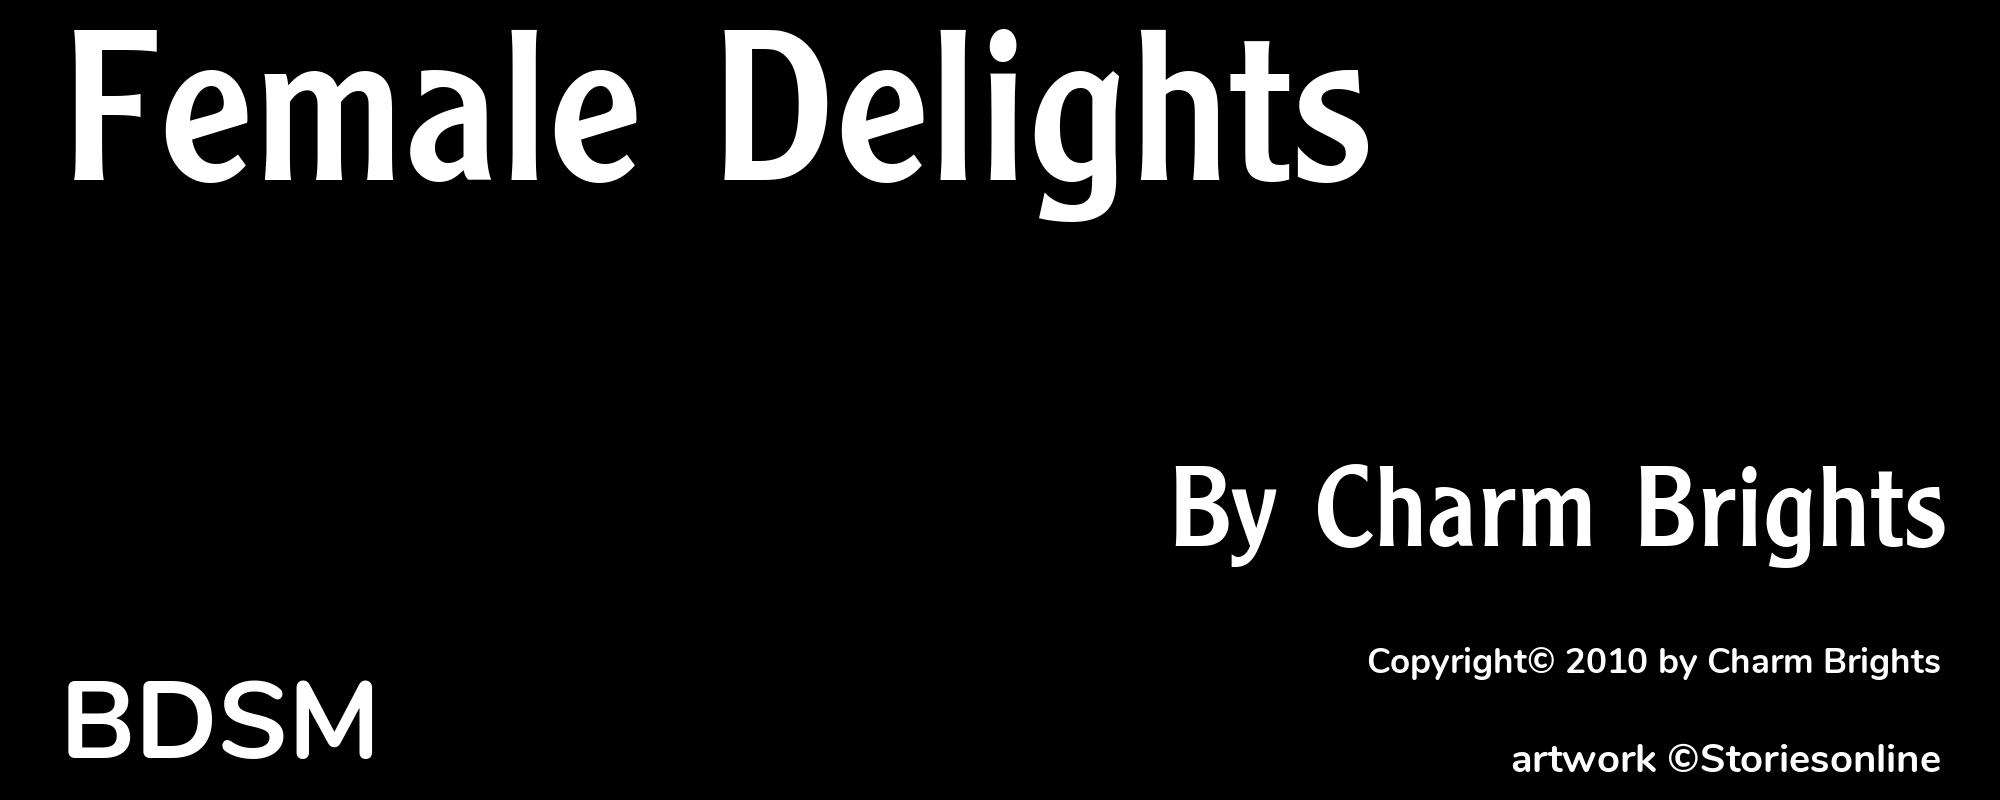 Female Delights - Cover